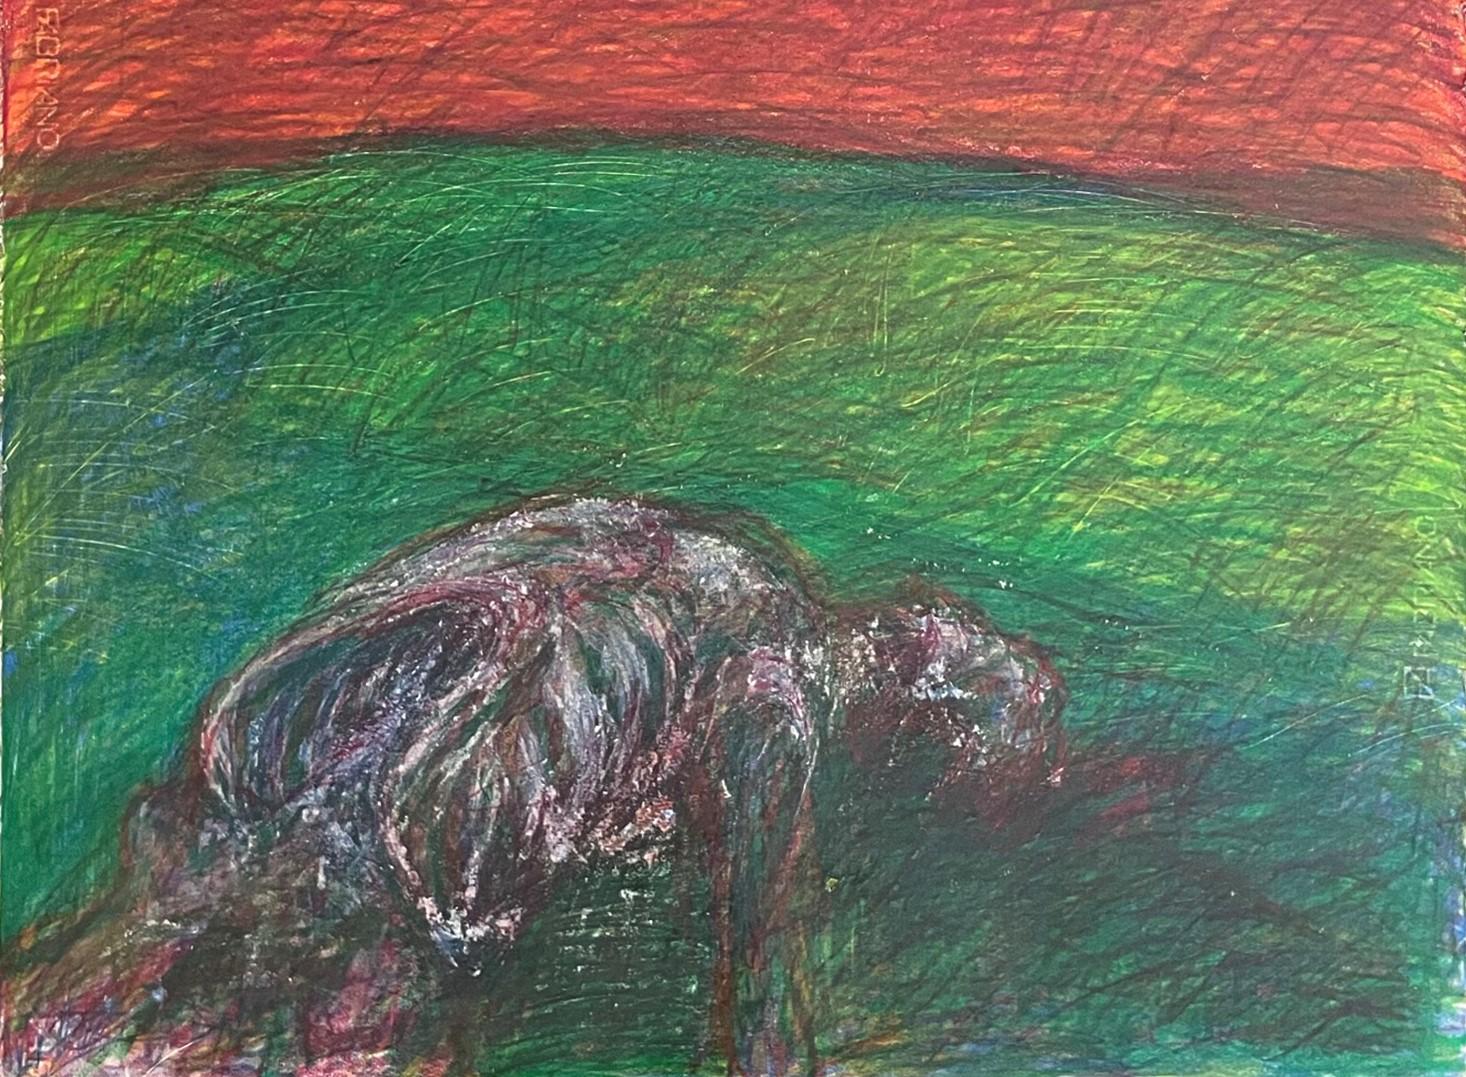 Untitled_Body on the Field #2 - Green, Red, Contemporary Art, Drawing - Brown Landscape Art by Zsolt Berszán